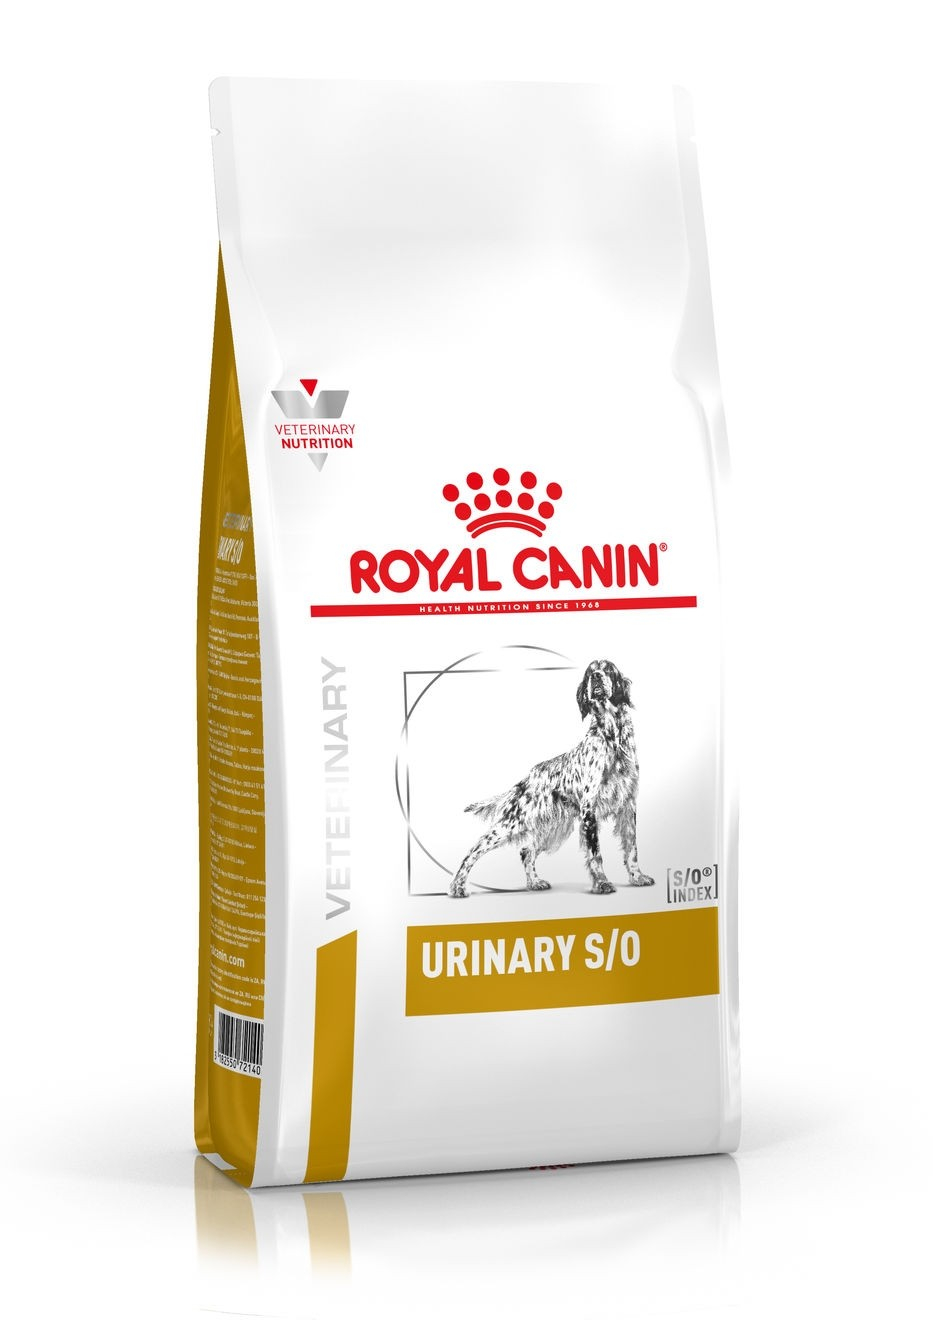 Royal Canin Veterinary Urinary S/O croquettes pour chien